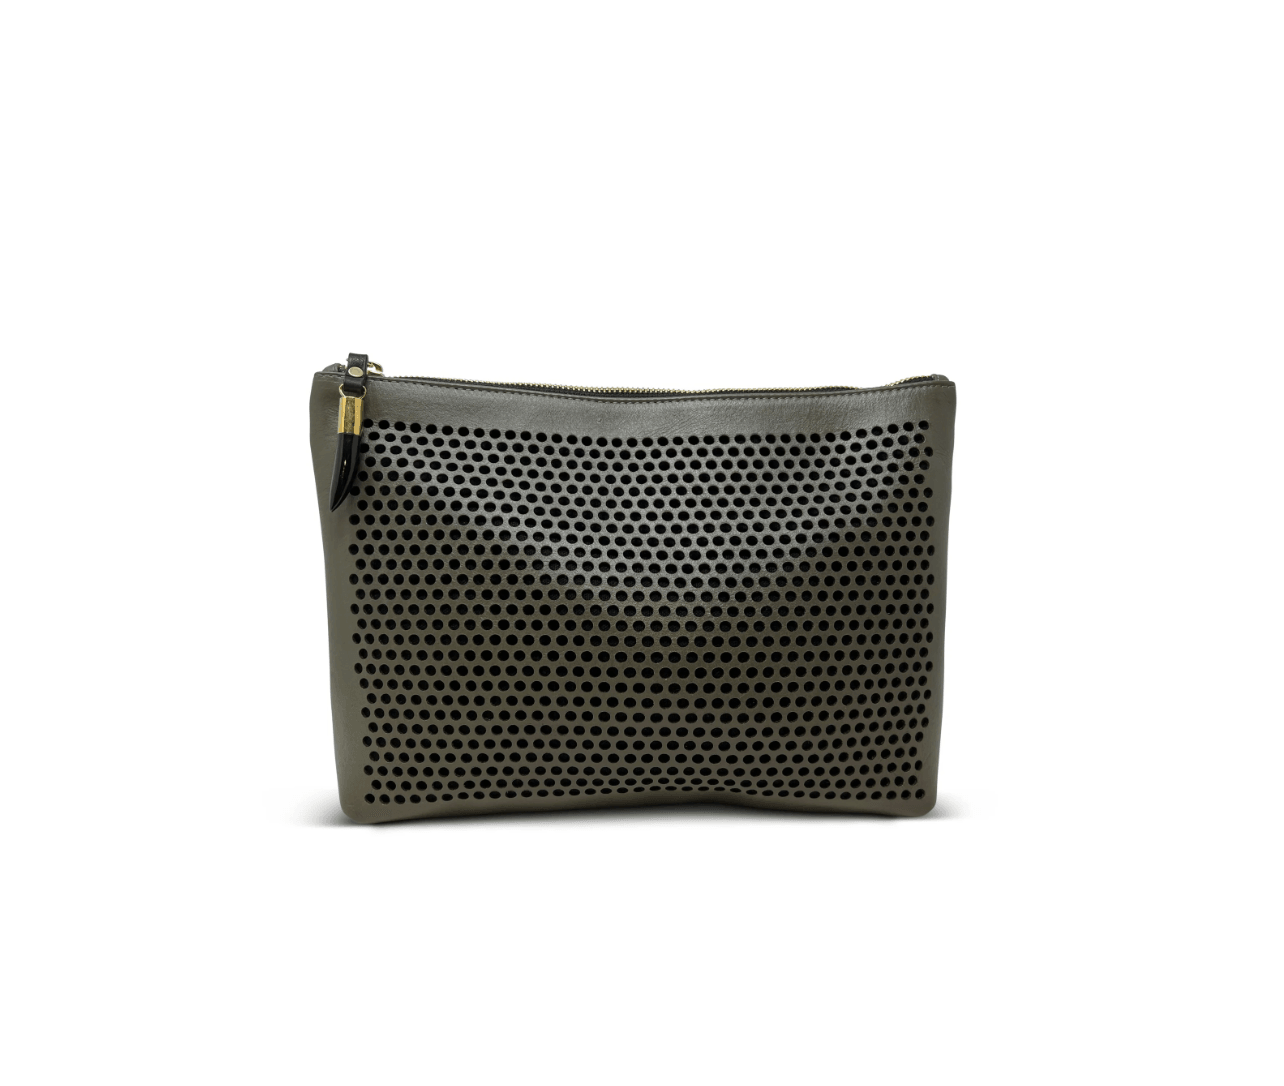 Medium Olive Perf Pouch by Kempton & Co.